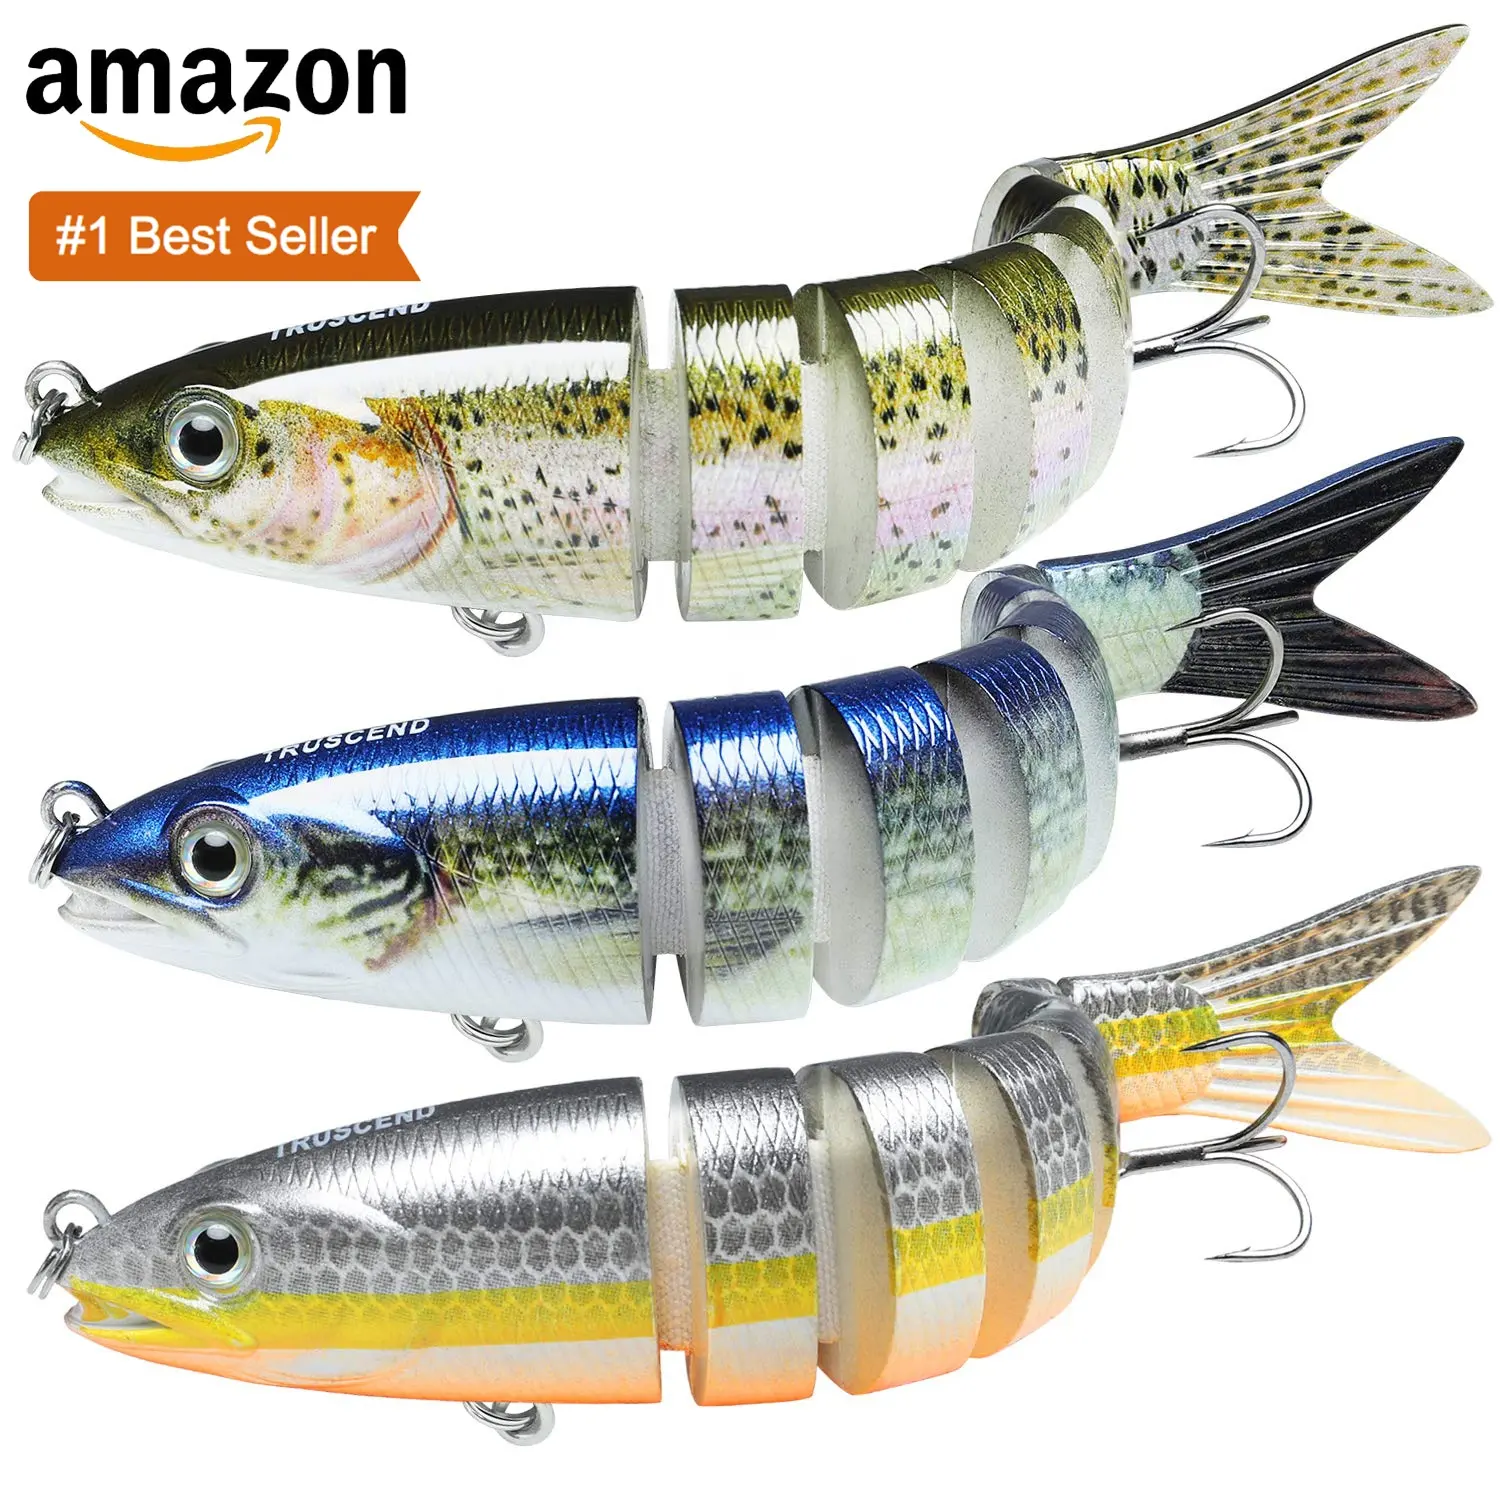 Truscend Promote bass pike trout hard plastic body artificial bionic multi jointed swimbait fishing lure for freshwater